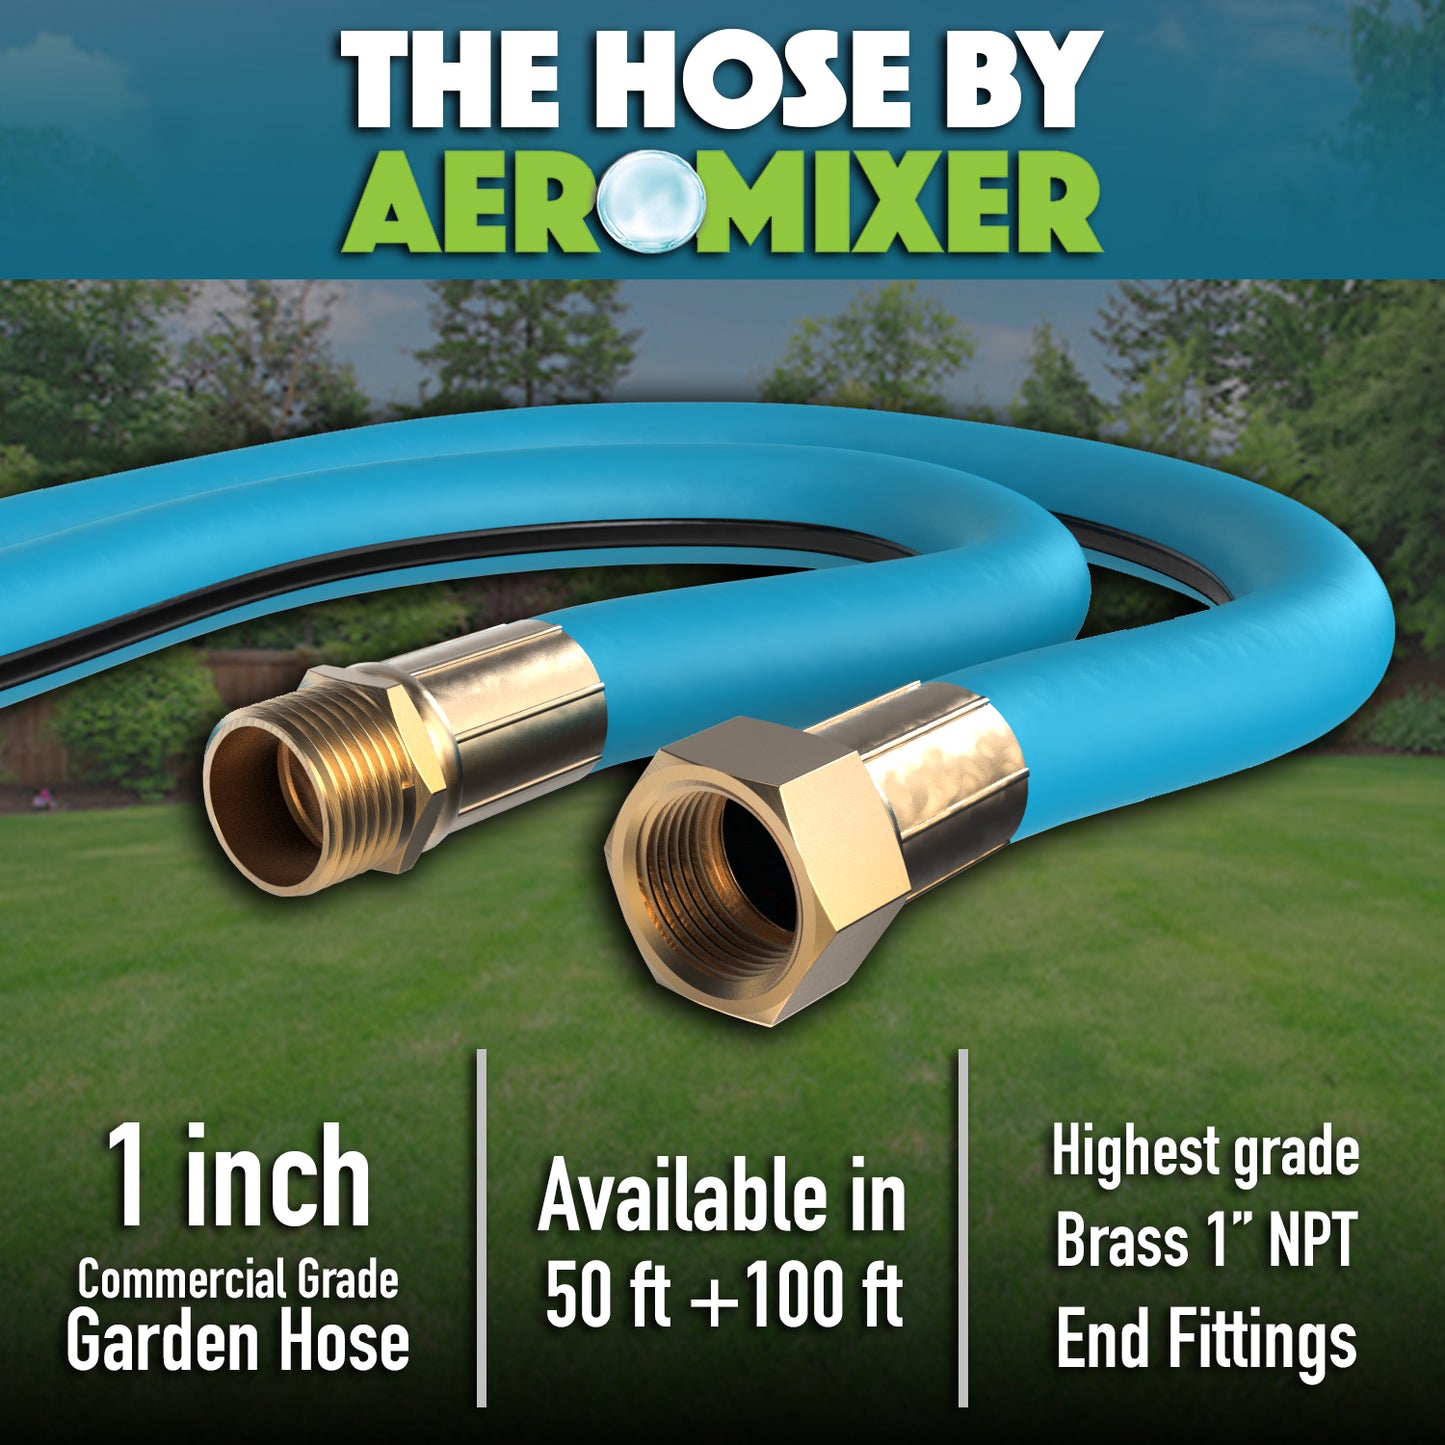 The Hose by Aeromixer